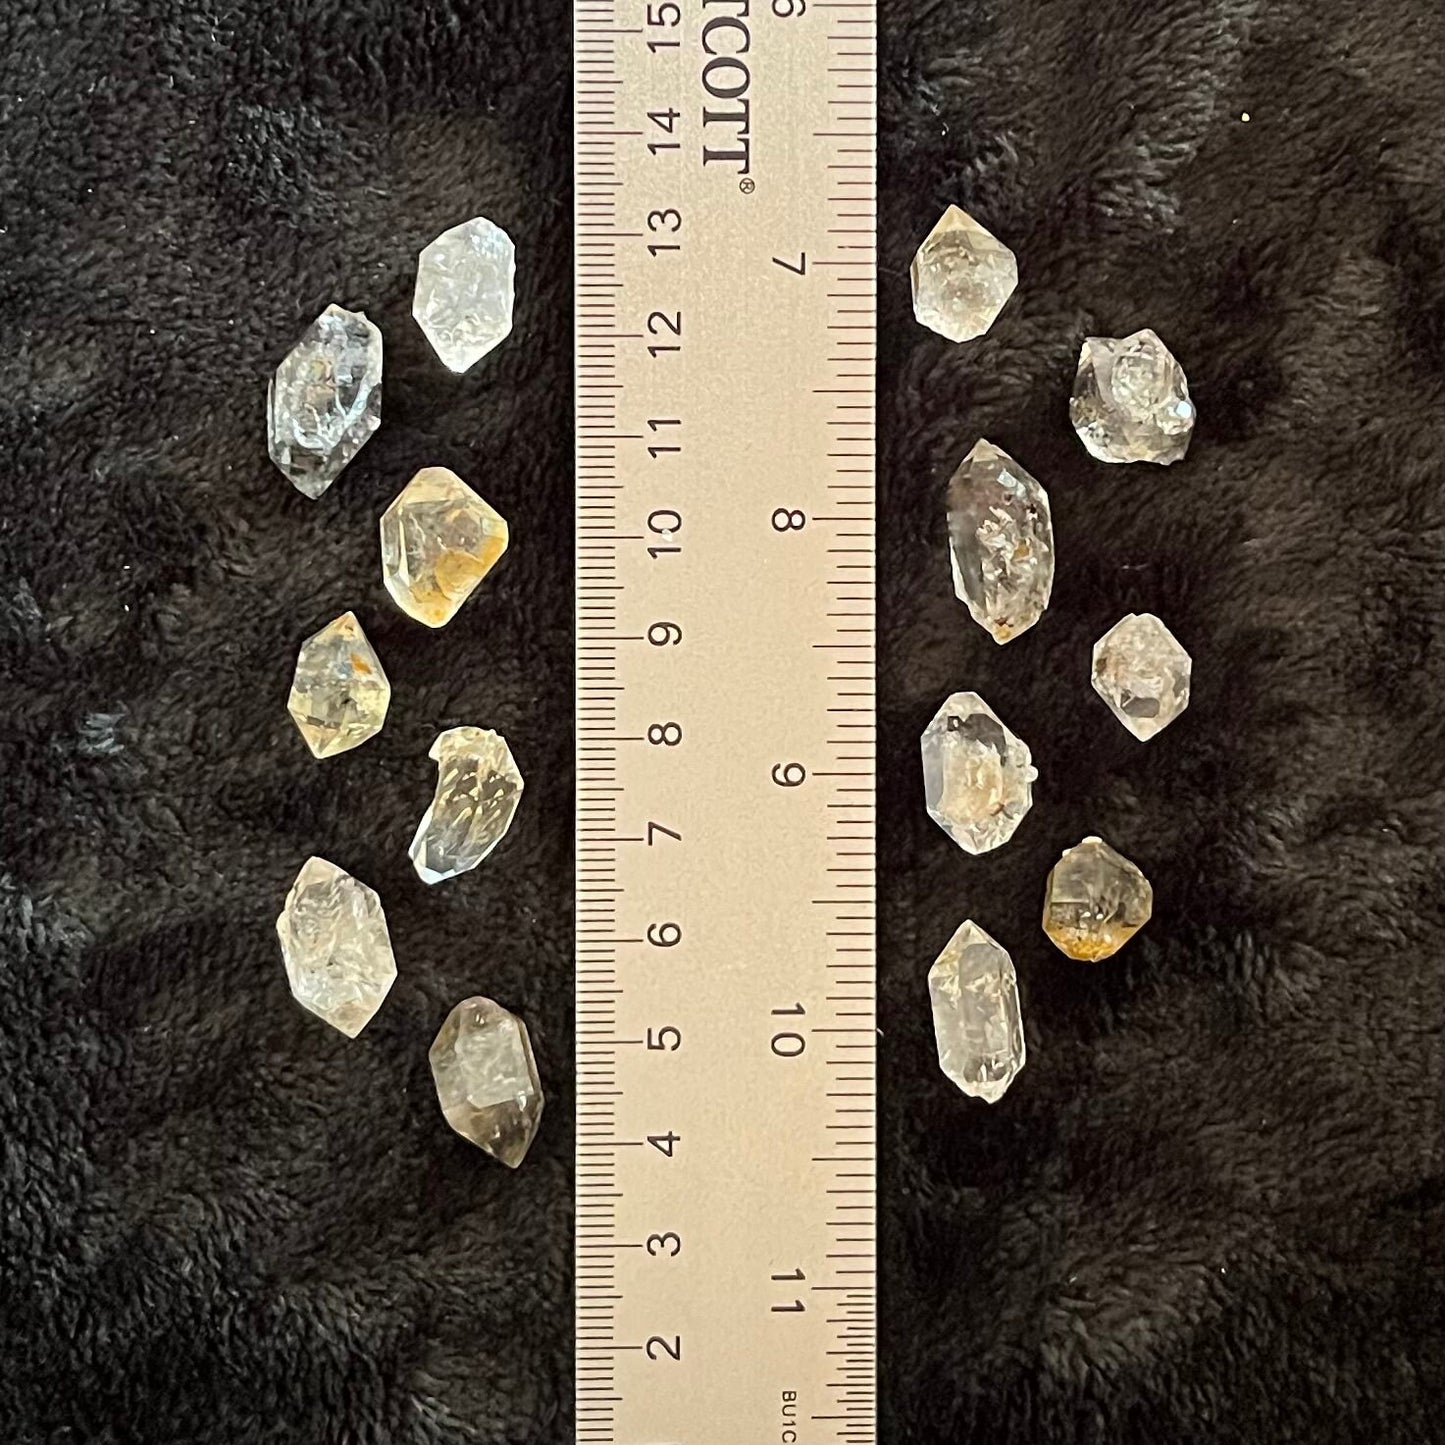 Herkimer Diamond, Natural, Raw/Rough Crystal, Warrior 0423 (Approx. 1/2" - 3/4")